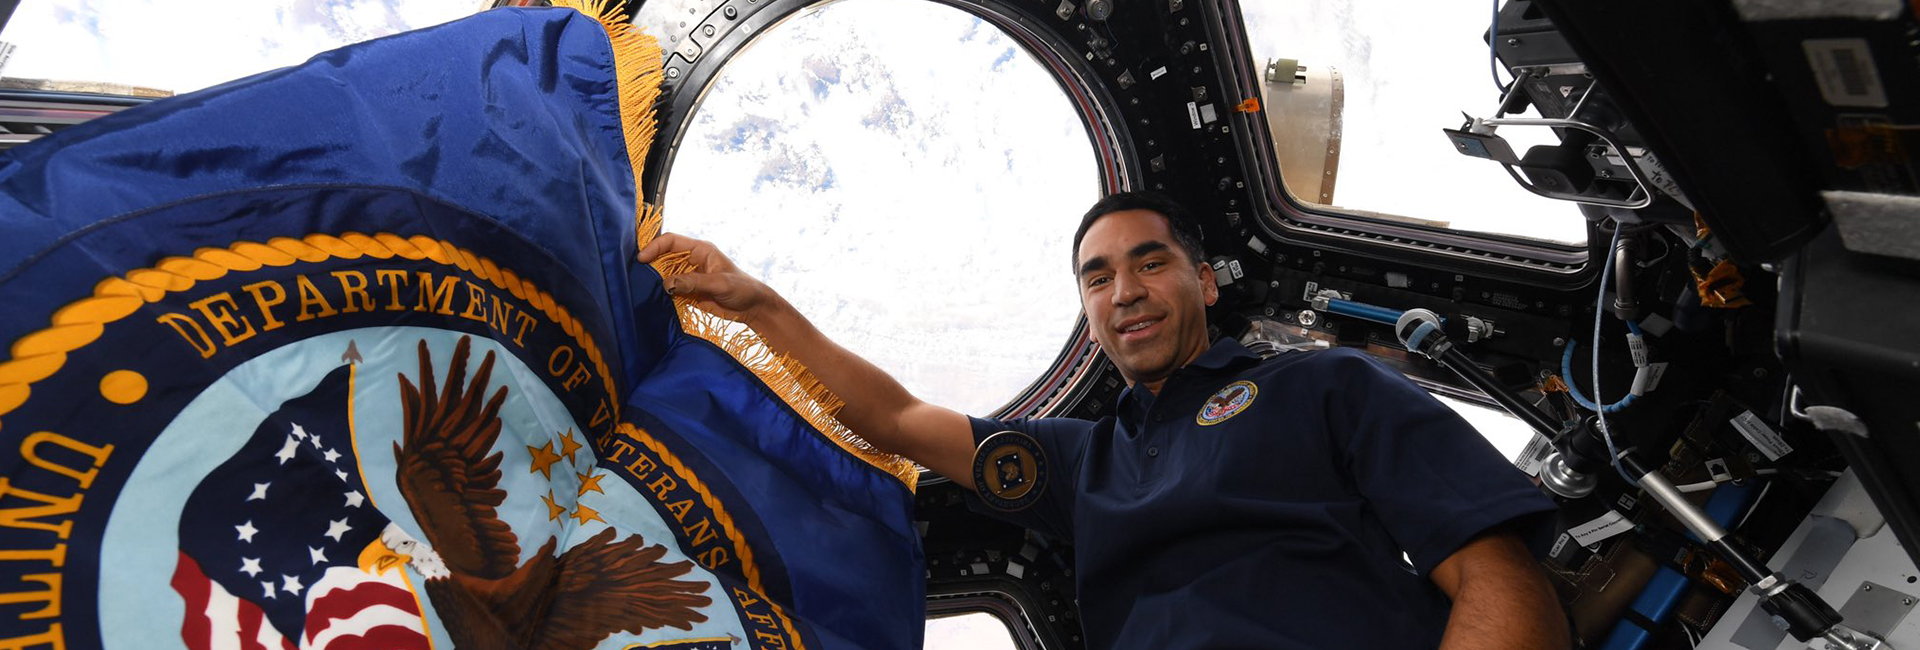 Indian American NASA Astronaut Raja Chari shared an image of himself docked at the International Space Station, one year ago. The astronaut is gearing up for NASA’s moon mission, Artemis.